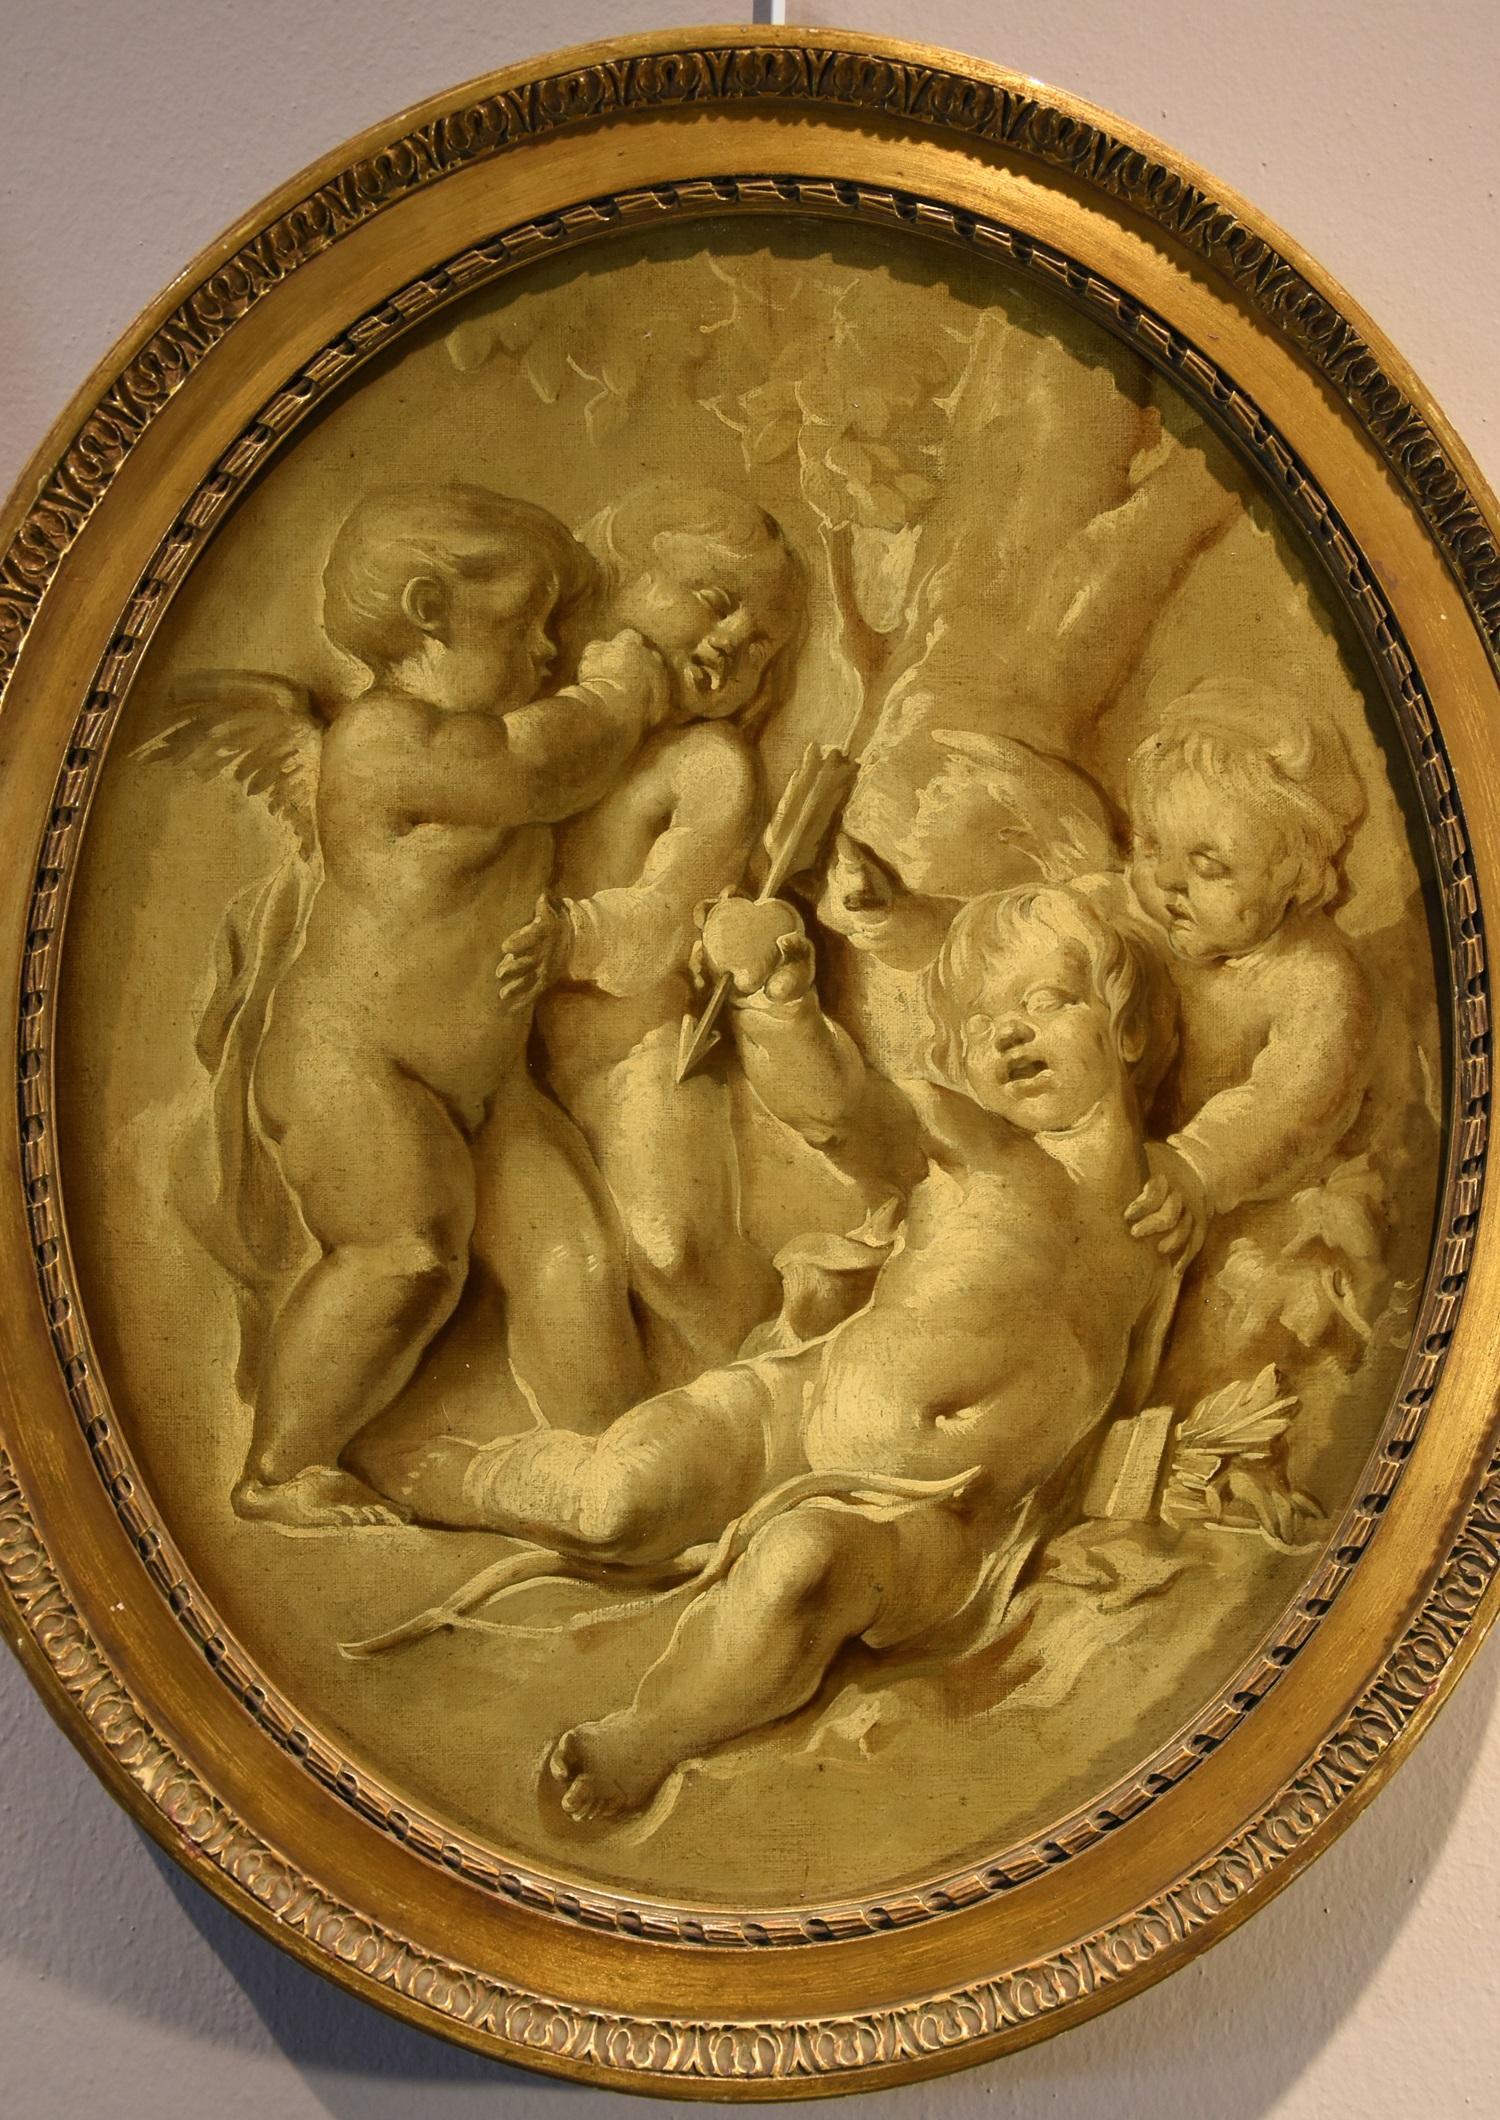 Putti Bacchus Sauvage Paint Oil on table 18th Century French school Mythologic  - Painting by Piat Joseph Sauvage (Tournai 1744-1818)